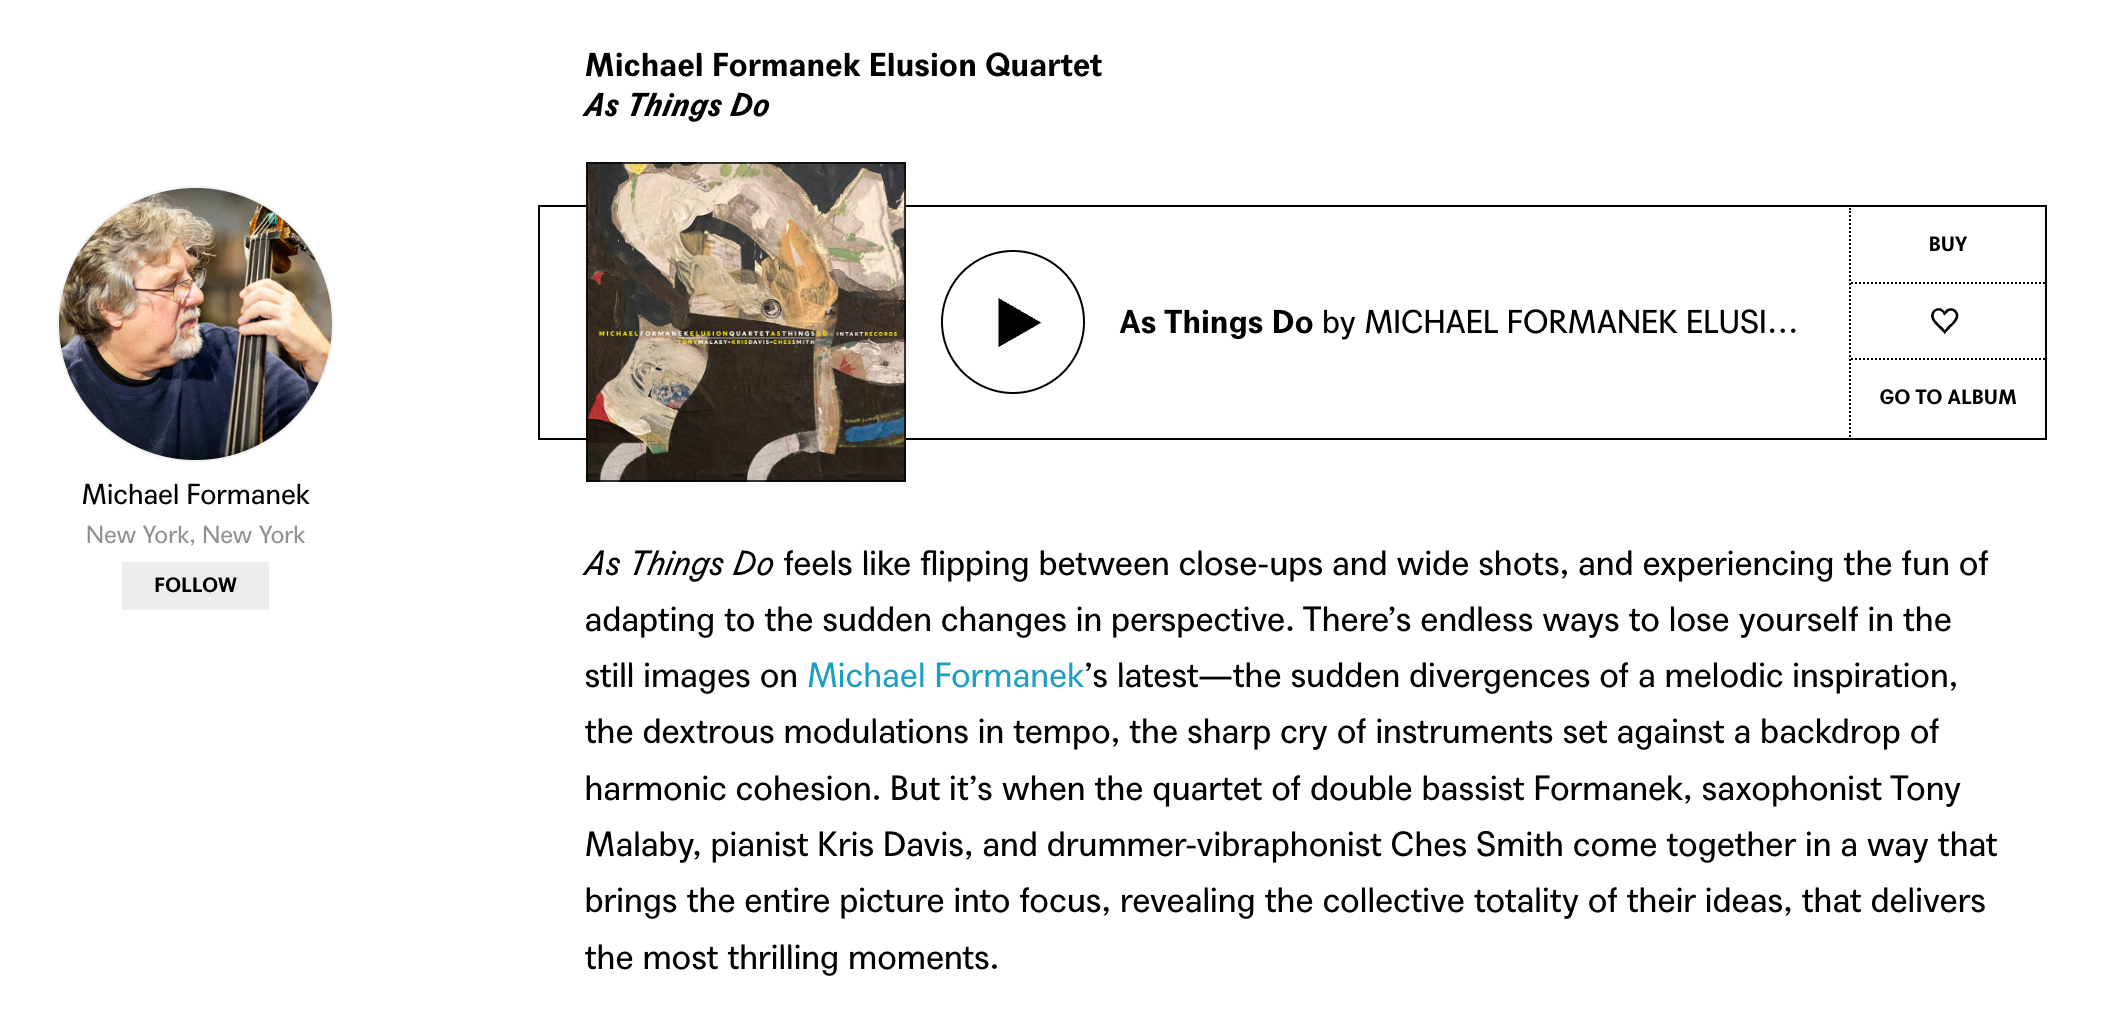 As Things Do feels like flipping between close-ups and wide shots, and experiencing the fun of adapting to the sudden changes in perspective. There’s endless ways to lose yourself in the still images on Michael Formanek’s latest—the sudden divergences of a melodic inspiration, the dextrous modulations in tempo, the sharp cry of instruments set against a backdrop of harmonic cohesion. But it’s when the quartet of double bassist Formanek, saxophonist Tony Malaby, pianist Kris Davis, and drummer-vibraphonist Ches Smith come together in a way that brings the entire picture into focus, revealing the collective totality of their ideas, that delivers the most thrilling moments.